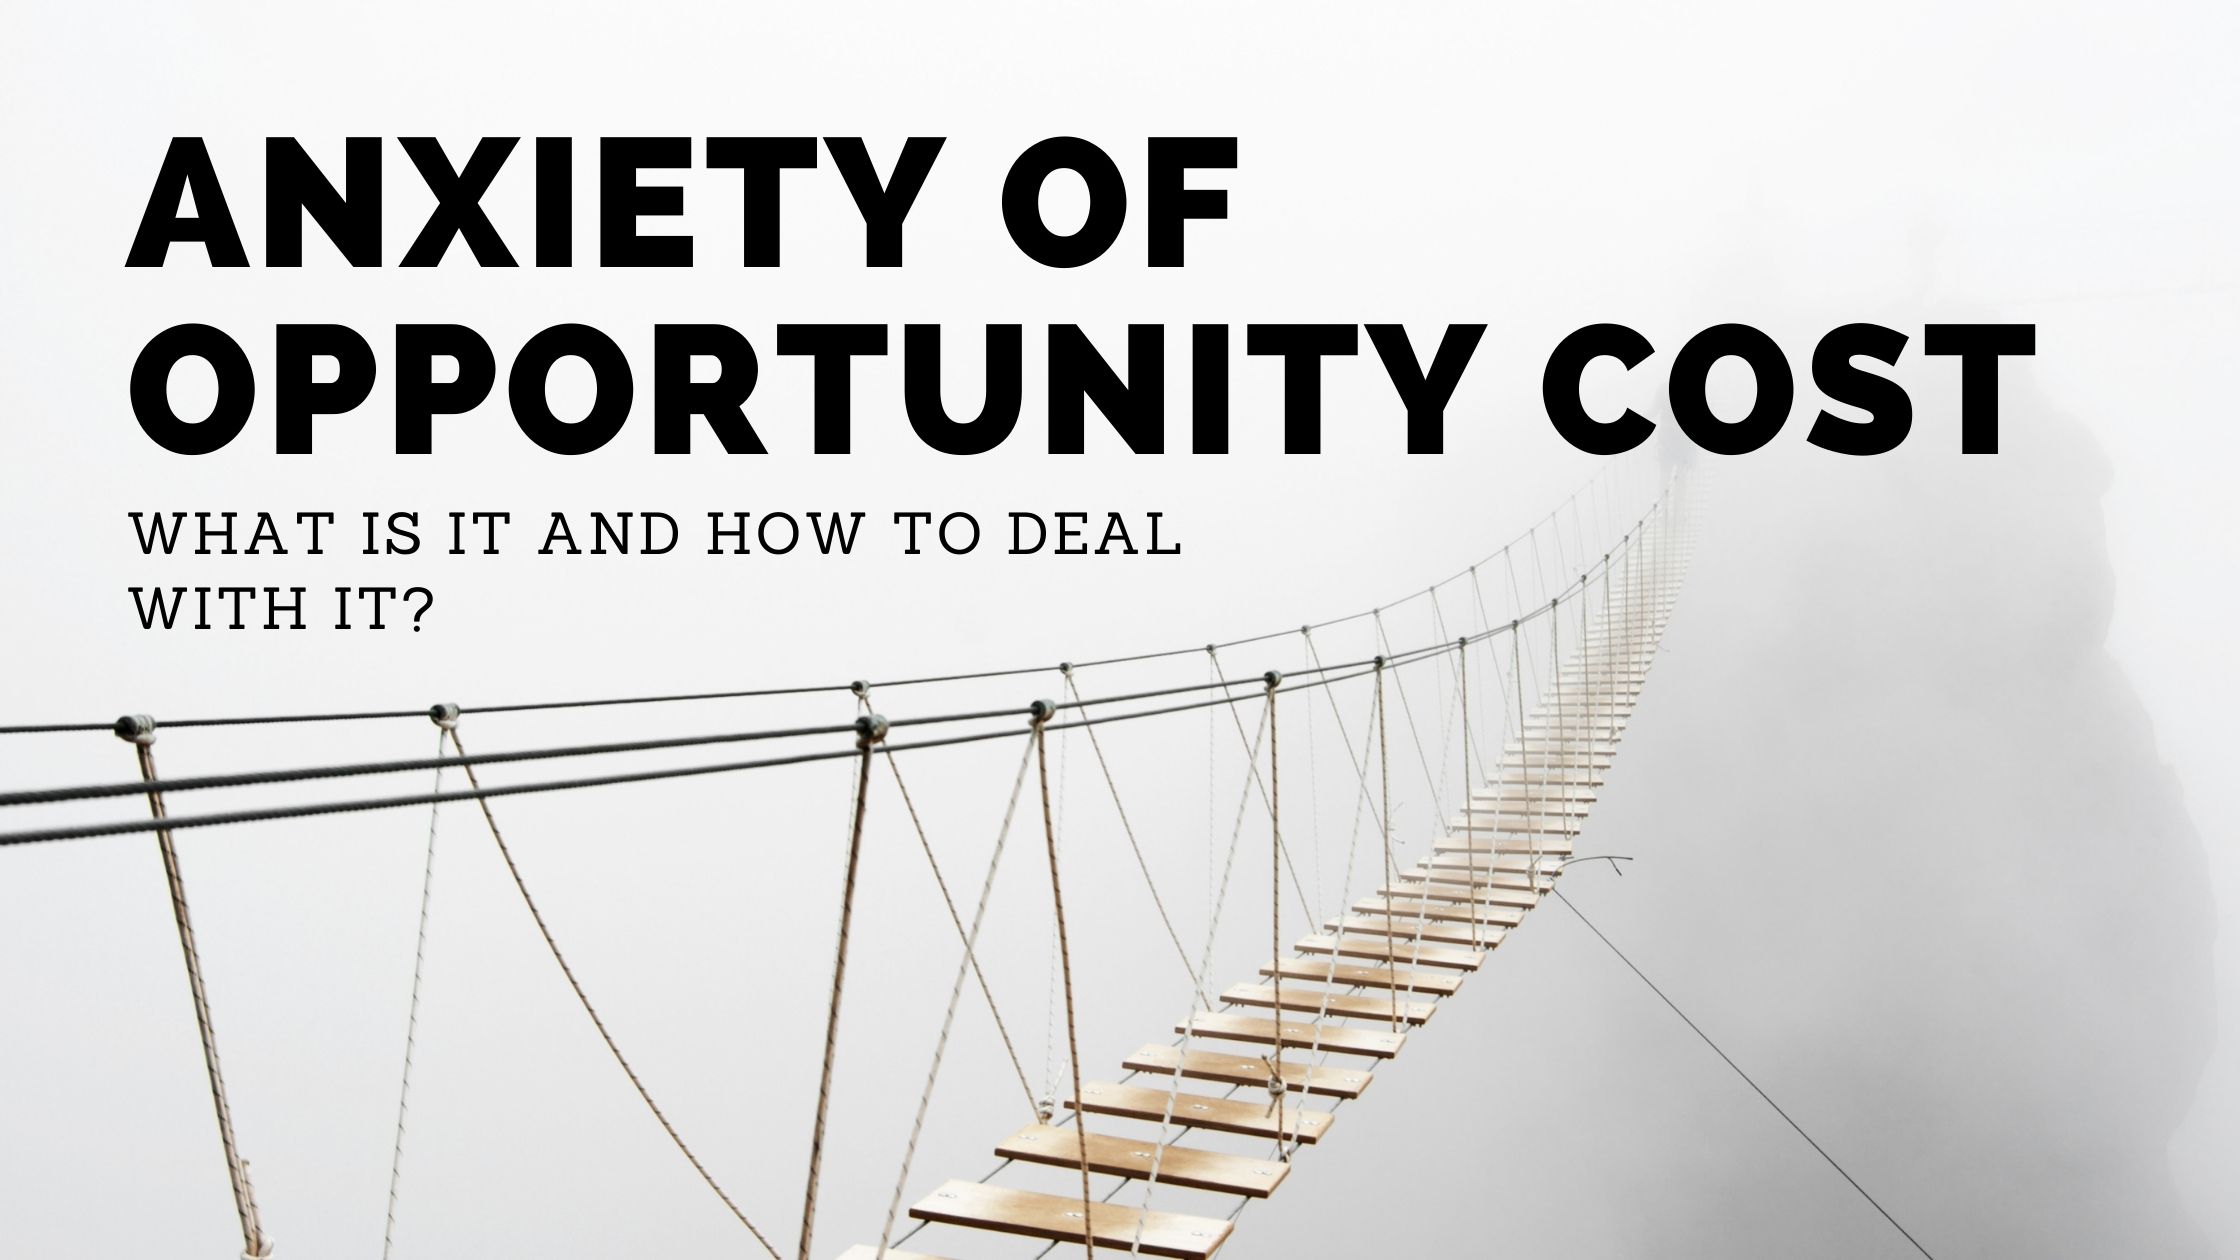 Anxiety of Opportunity Cost